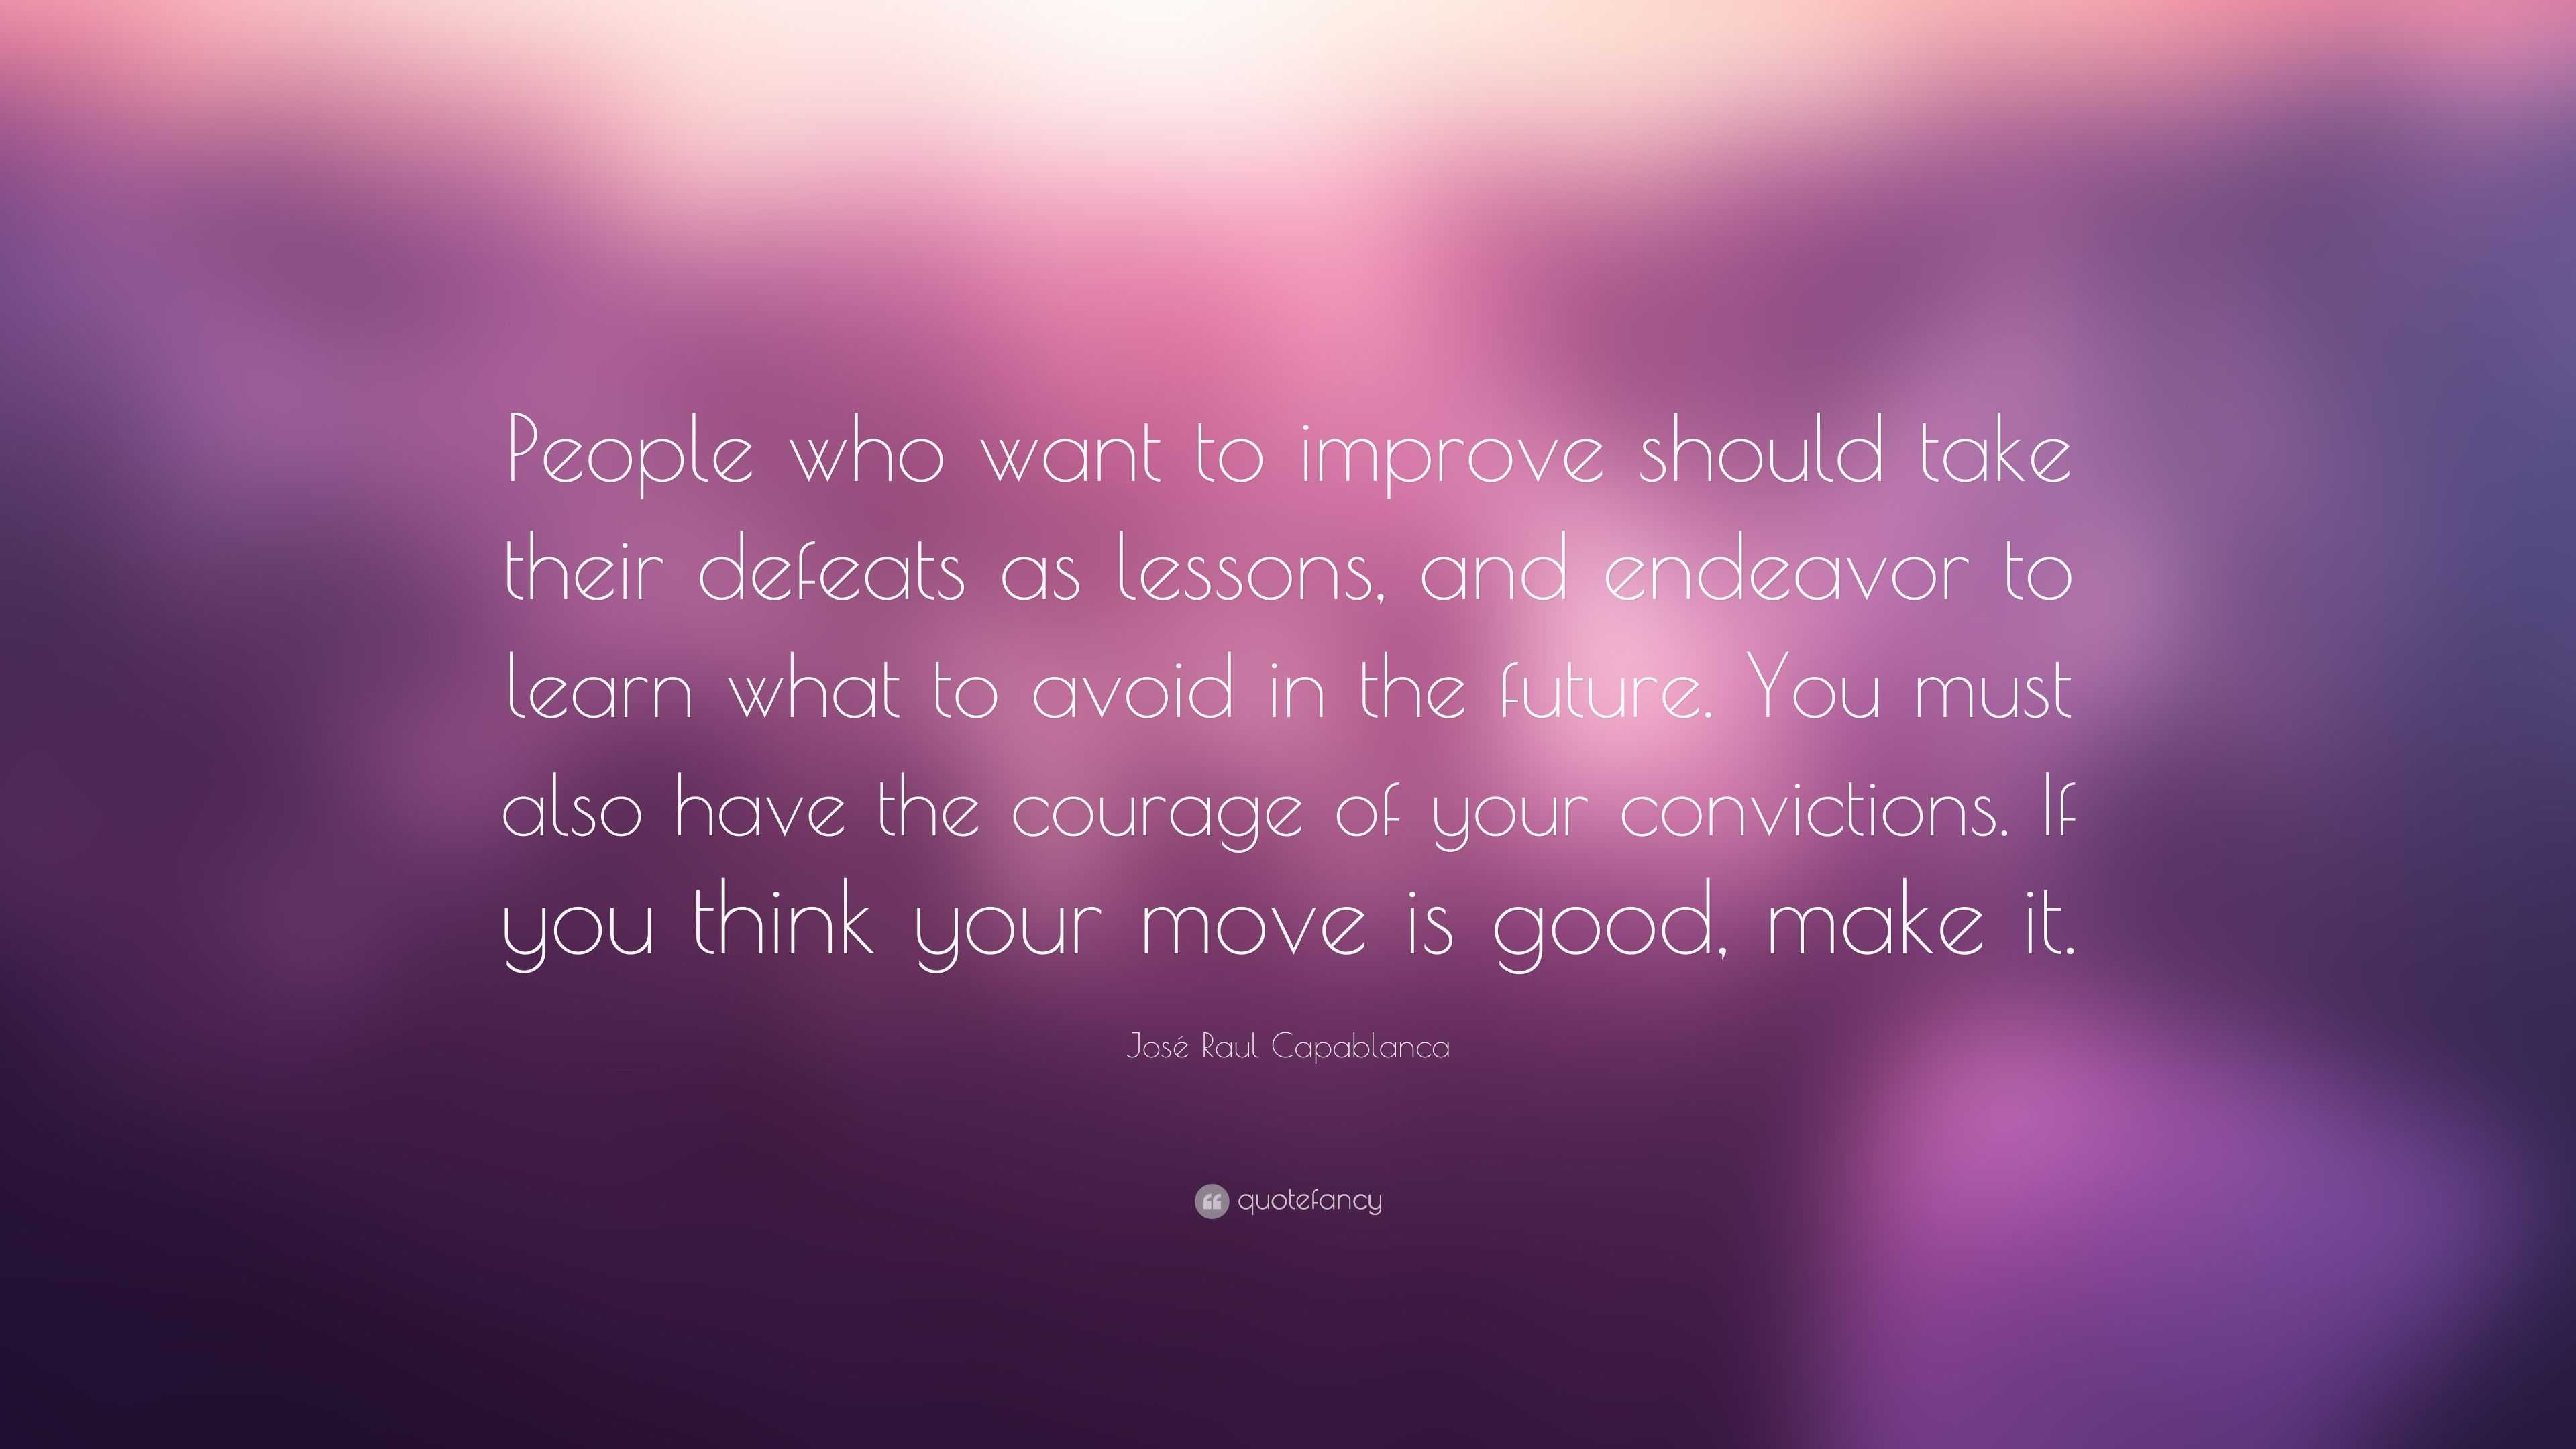 José Raul Capablanca Quote: “People who want to improve should take ...